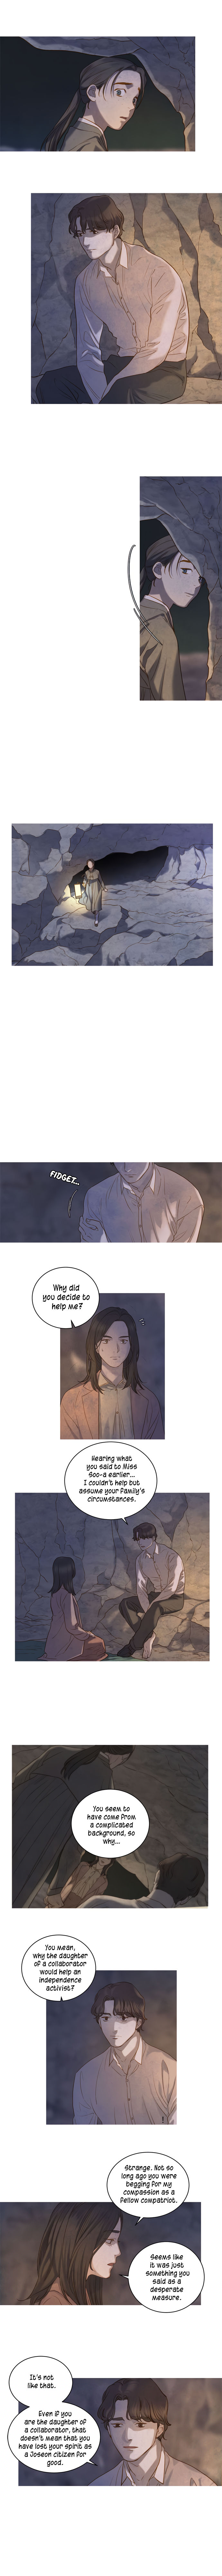 The Whale Star - The Gyeongseong Mermaid - Chapter 5 Page 7